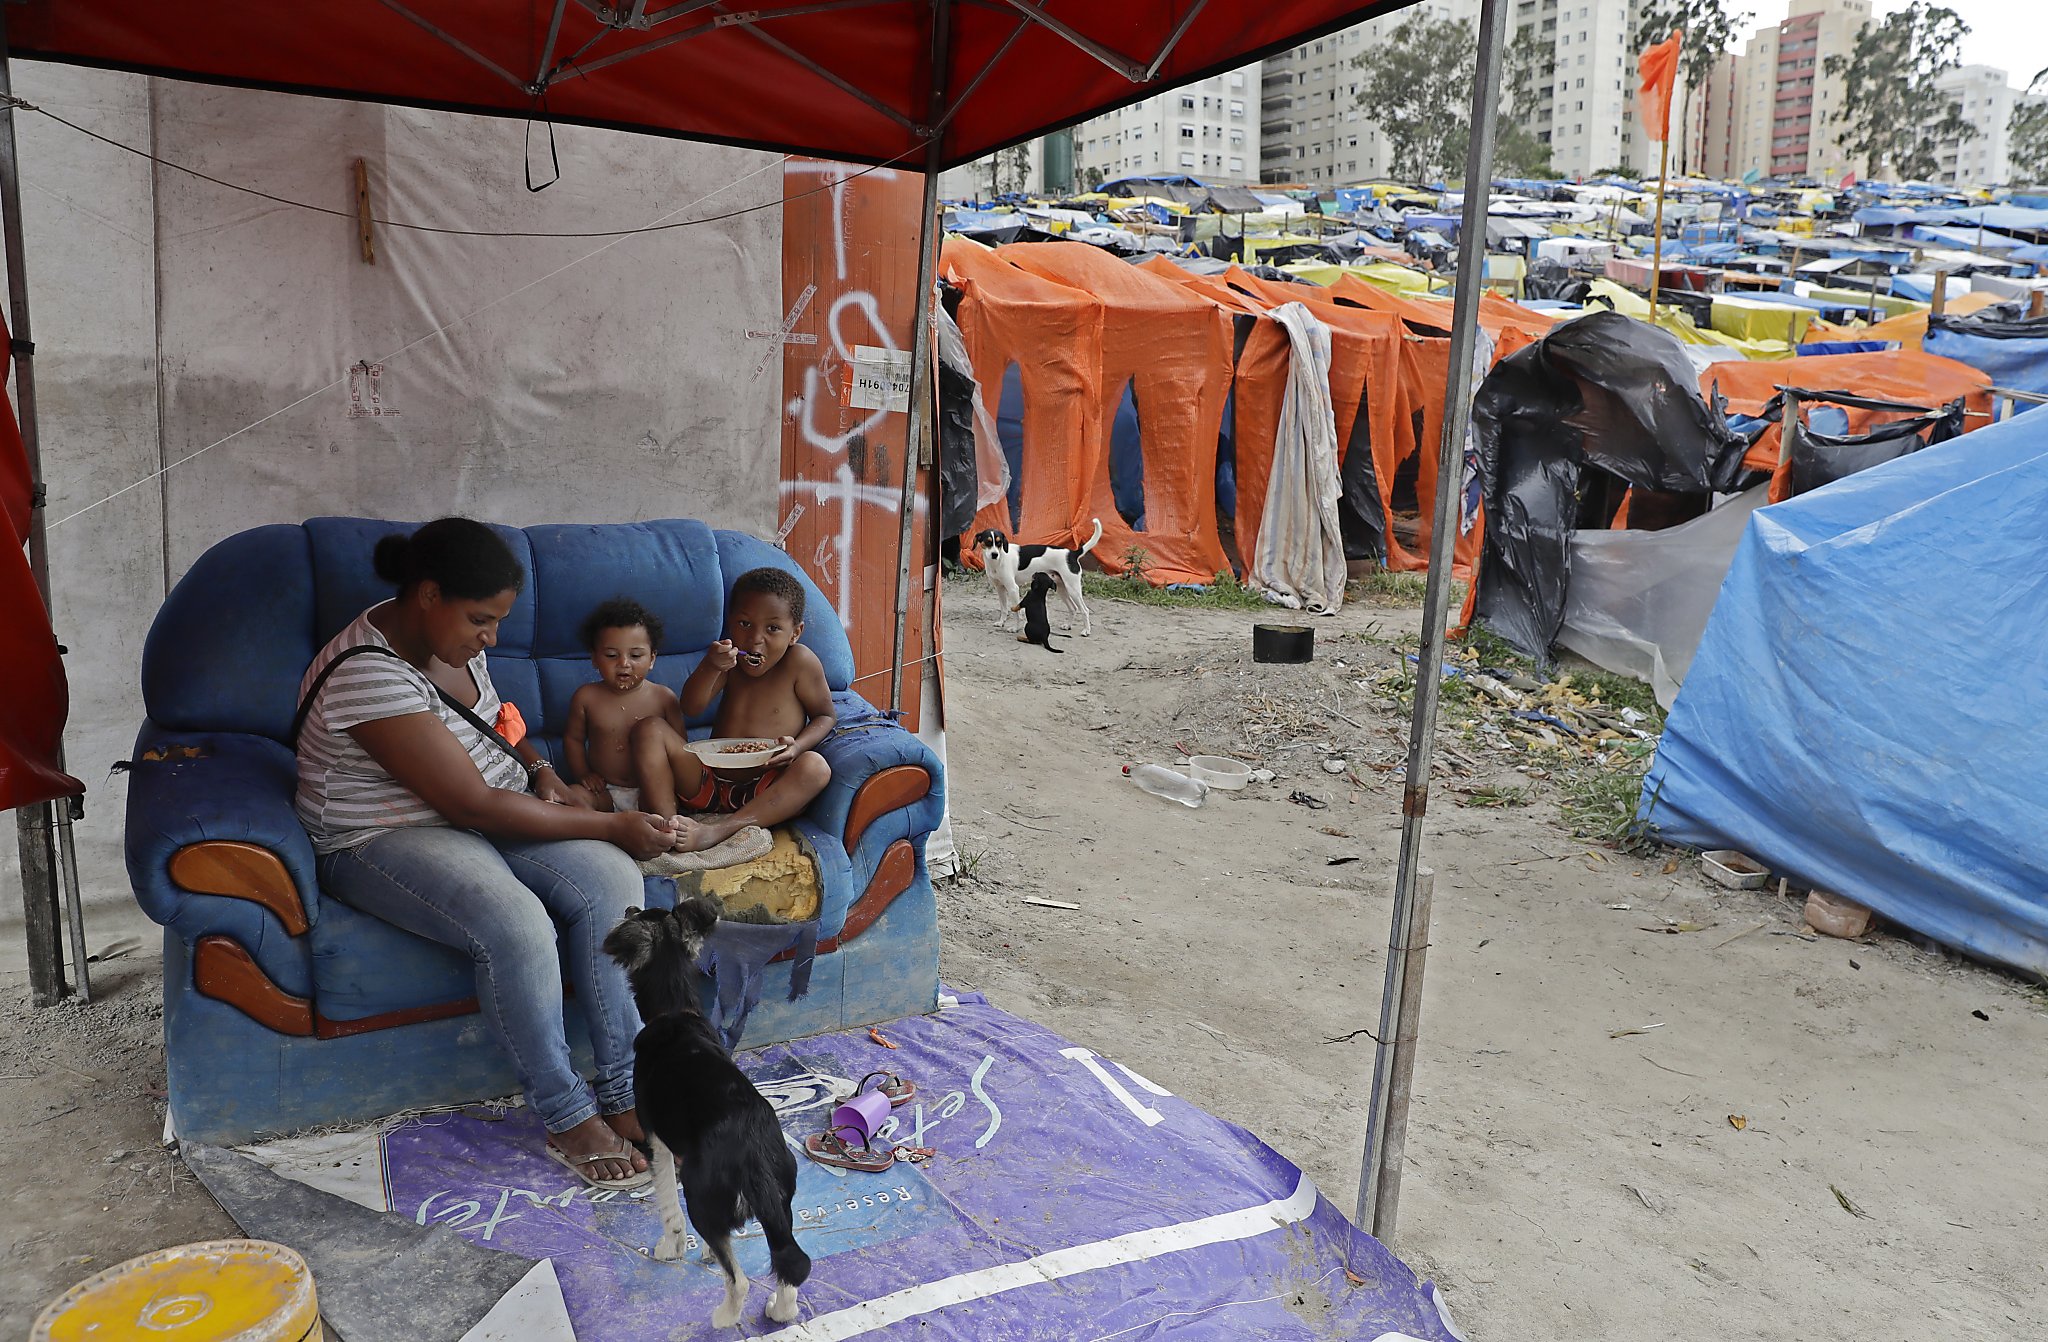 Mass occupation underscores Brazil’s poverty, creates angst SFGate